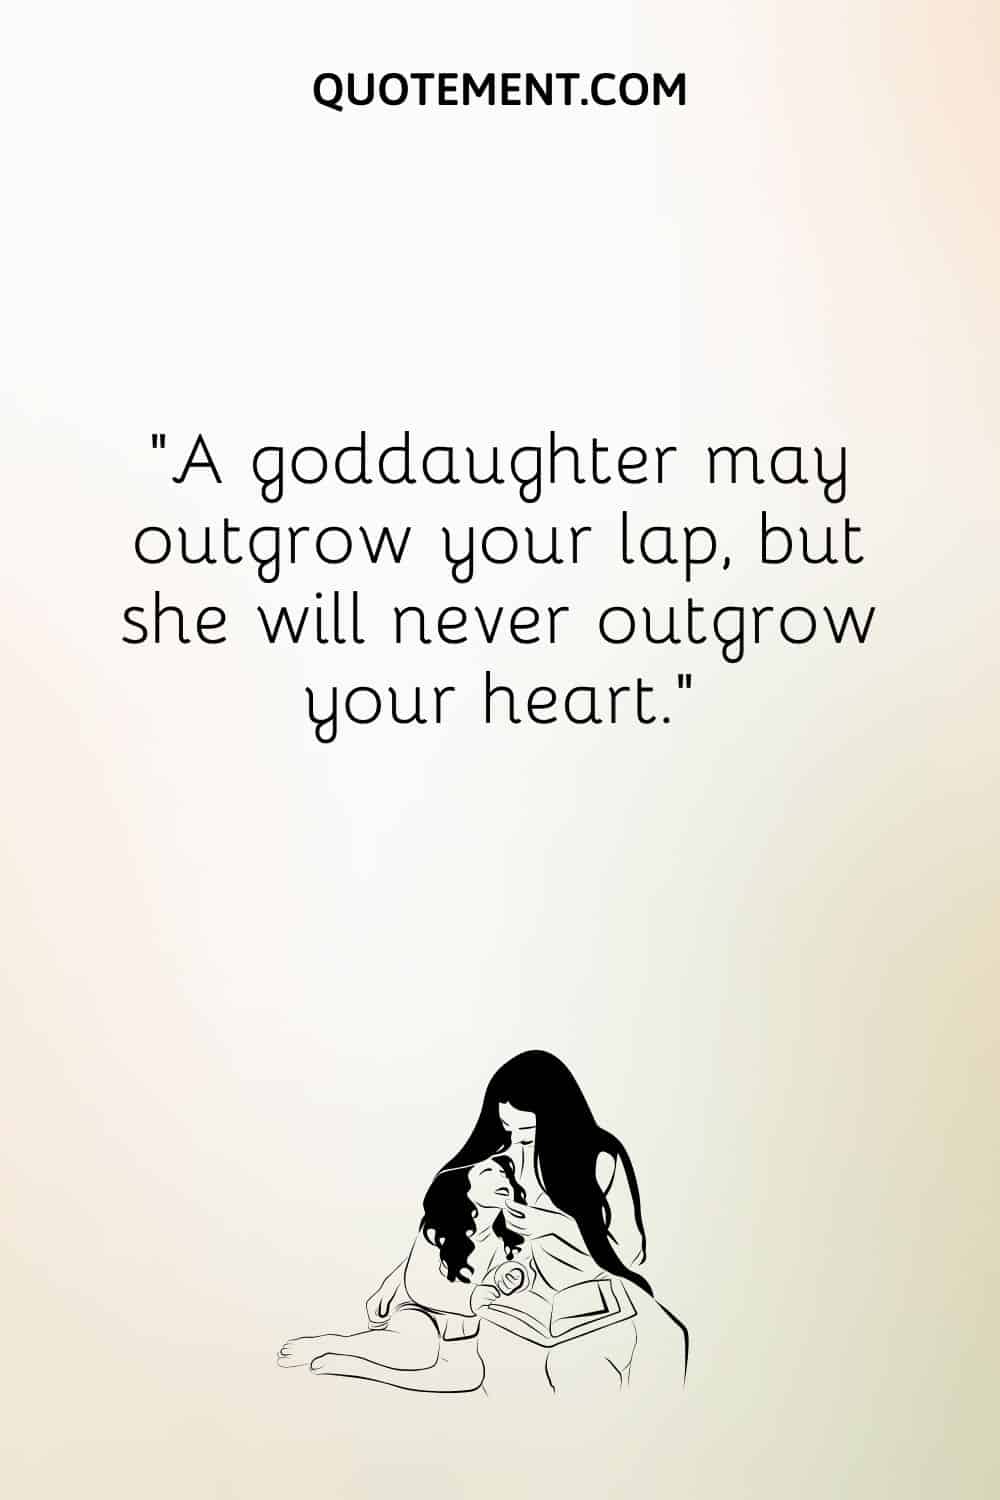 Illustration representing best goddaughter quote and godmother and goddaughter.